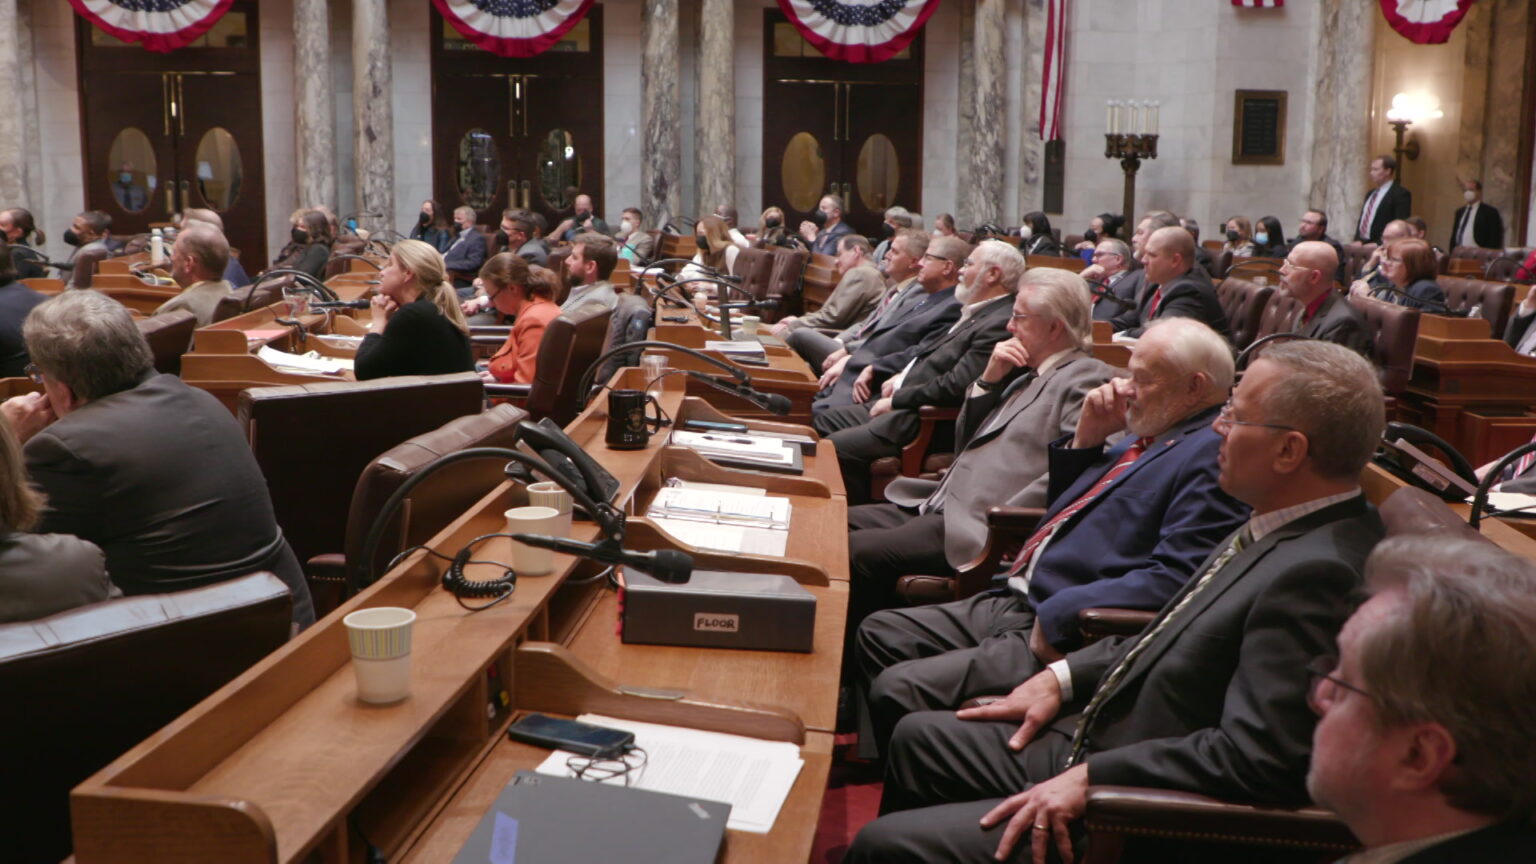 Members of the Wisconsin Assembly sit at their desks and listen to a speech.